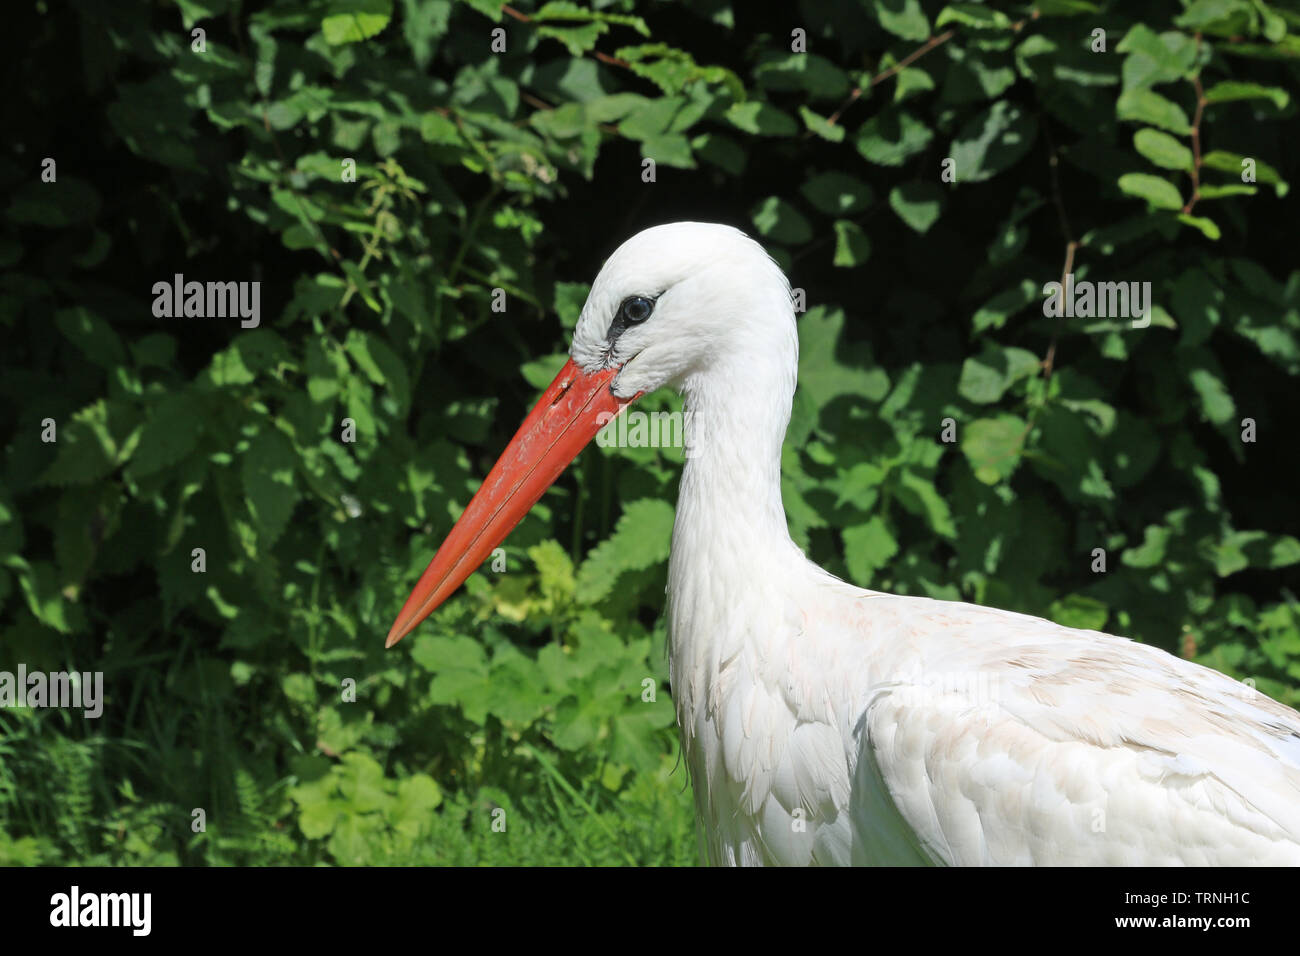 White stork, Ciconia ciconia, head and shoulders facing left with a background of blurred leaves and good copy space. Stock Photo